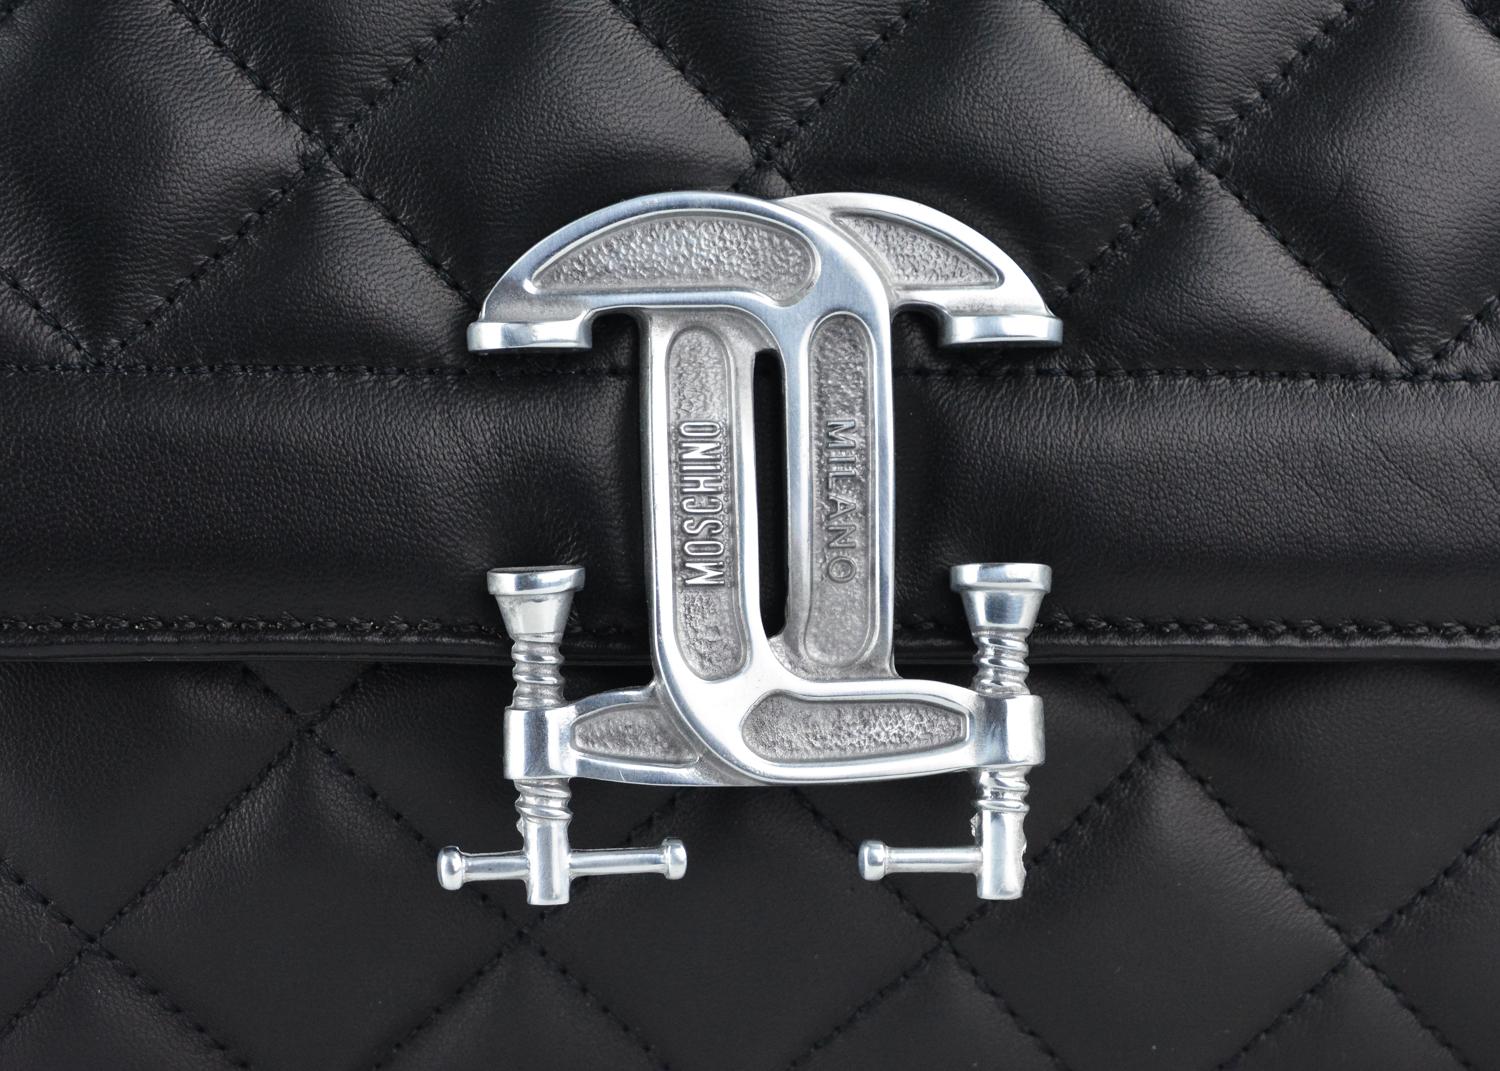 Moschino black leather quilted shoulder bag. This bag features a silver tone hardware logo in the front. This shoulder bag is a classic silhouette that is great to wear as an everyday purse. Pair with an outfit for a chic everyday